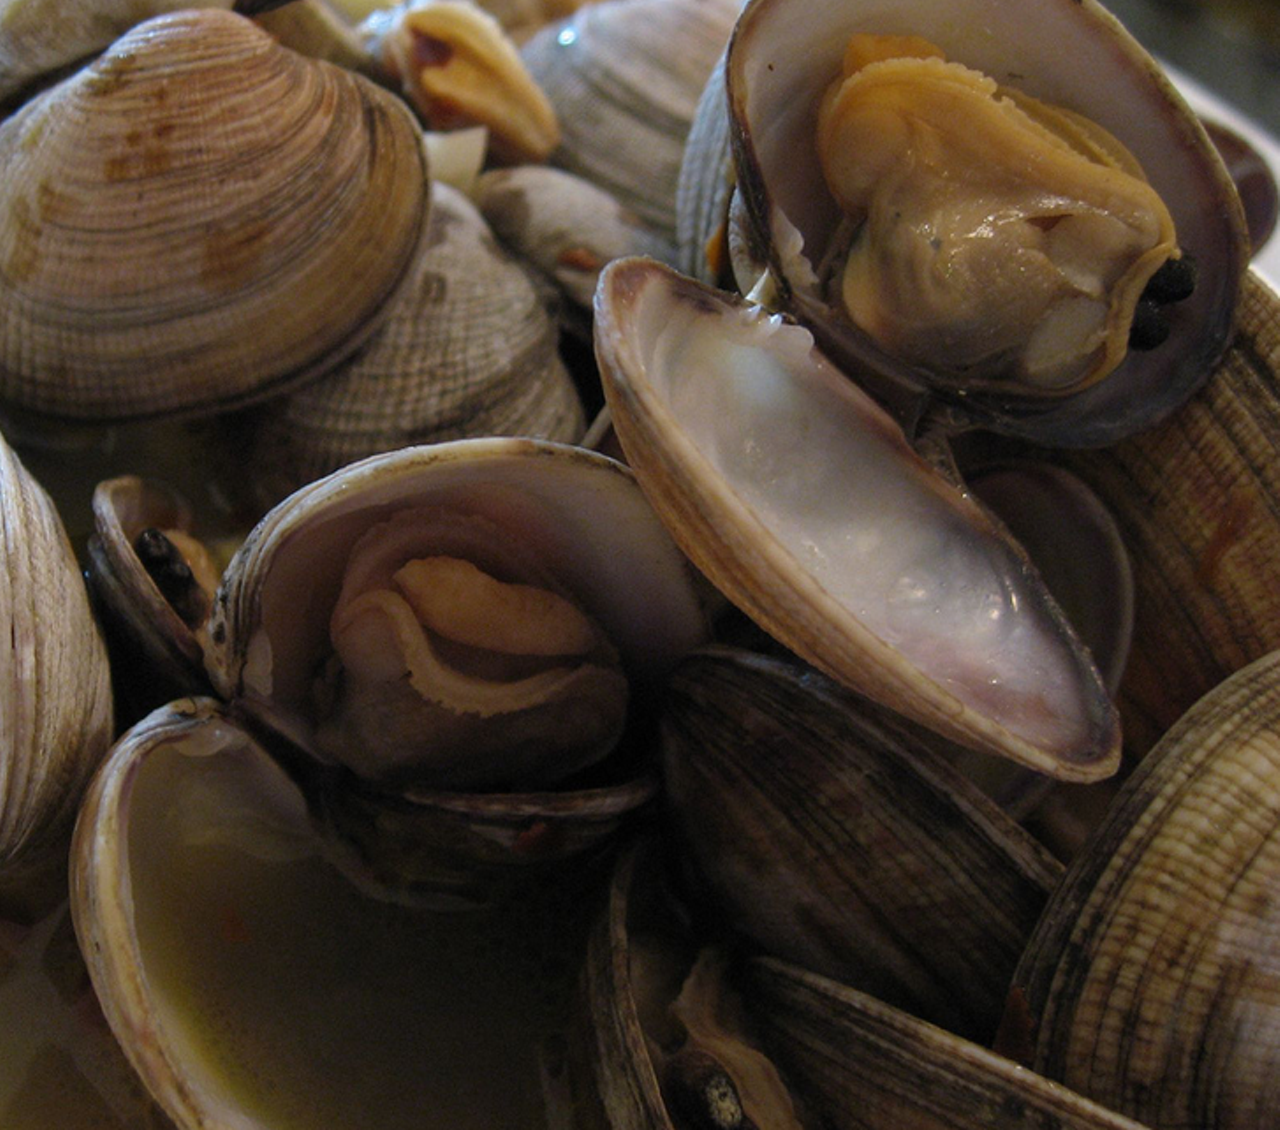 When: Saturday, Oct. 18 from 3 – 6 p.m.
Menu: One dozen clams, choice of chicken or steak, baked potato, corn on the cob, and clam chowder. Extra clams are $7.00.
Cost: $20.00 (chicken) or $25.00(steak)
Limited tickets are available and can be purchased at the Parkview which is located at 1261 West 58th Street. Call (216) 961-1341 for more information. Tickets must be purchased by Oct. 16.